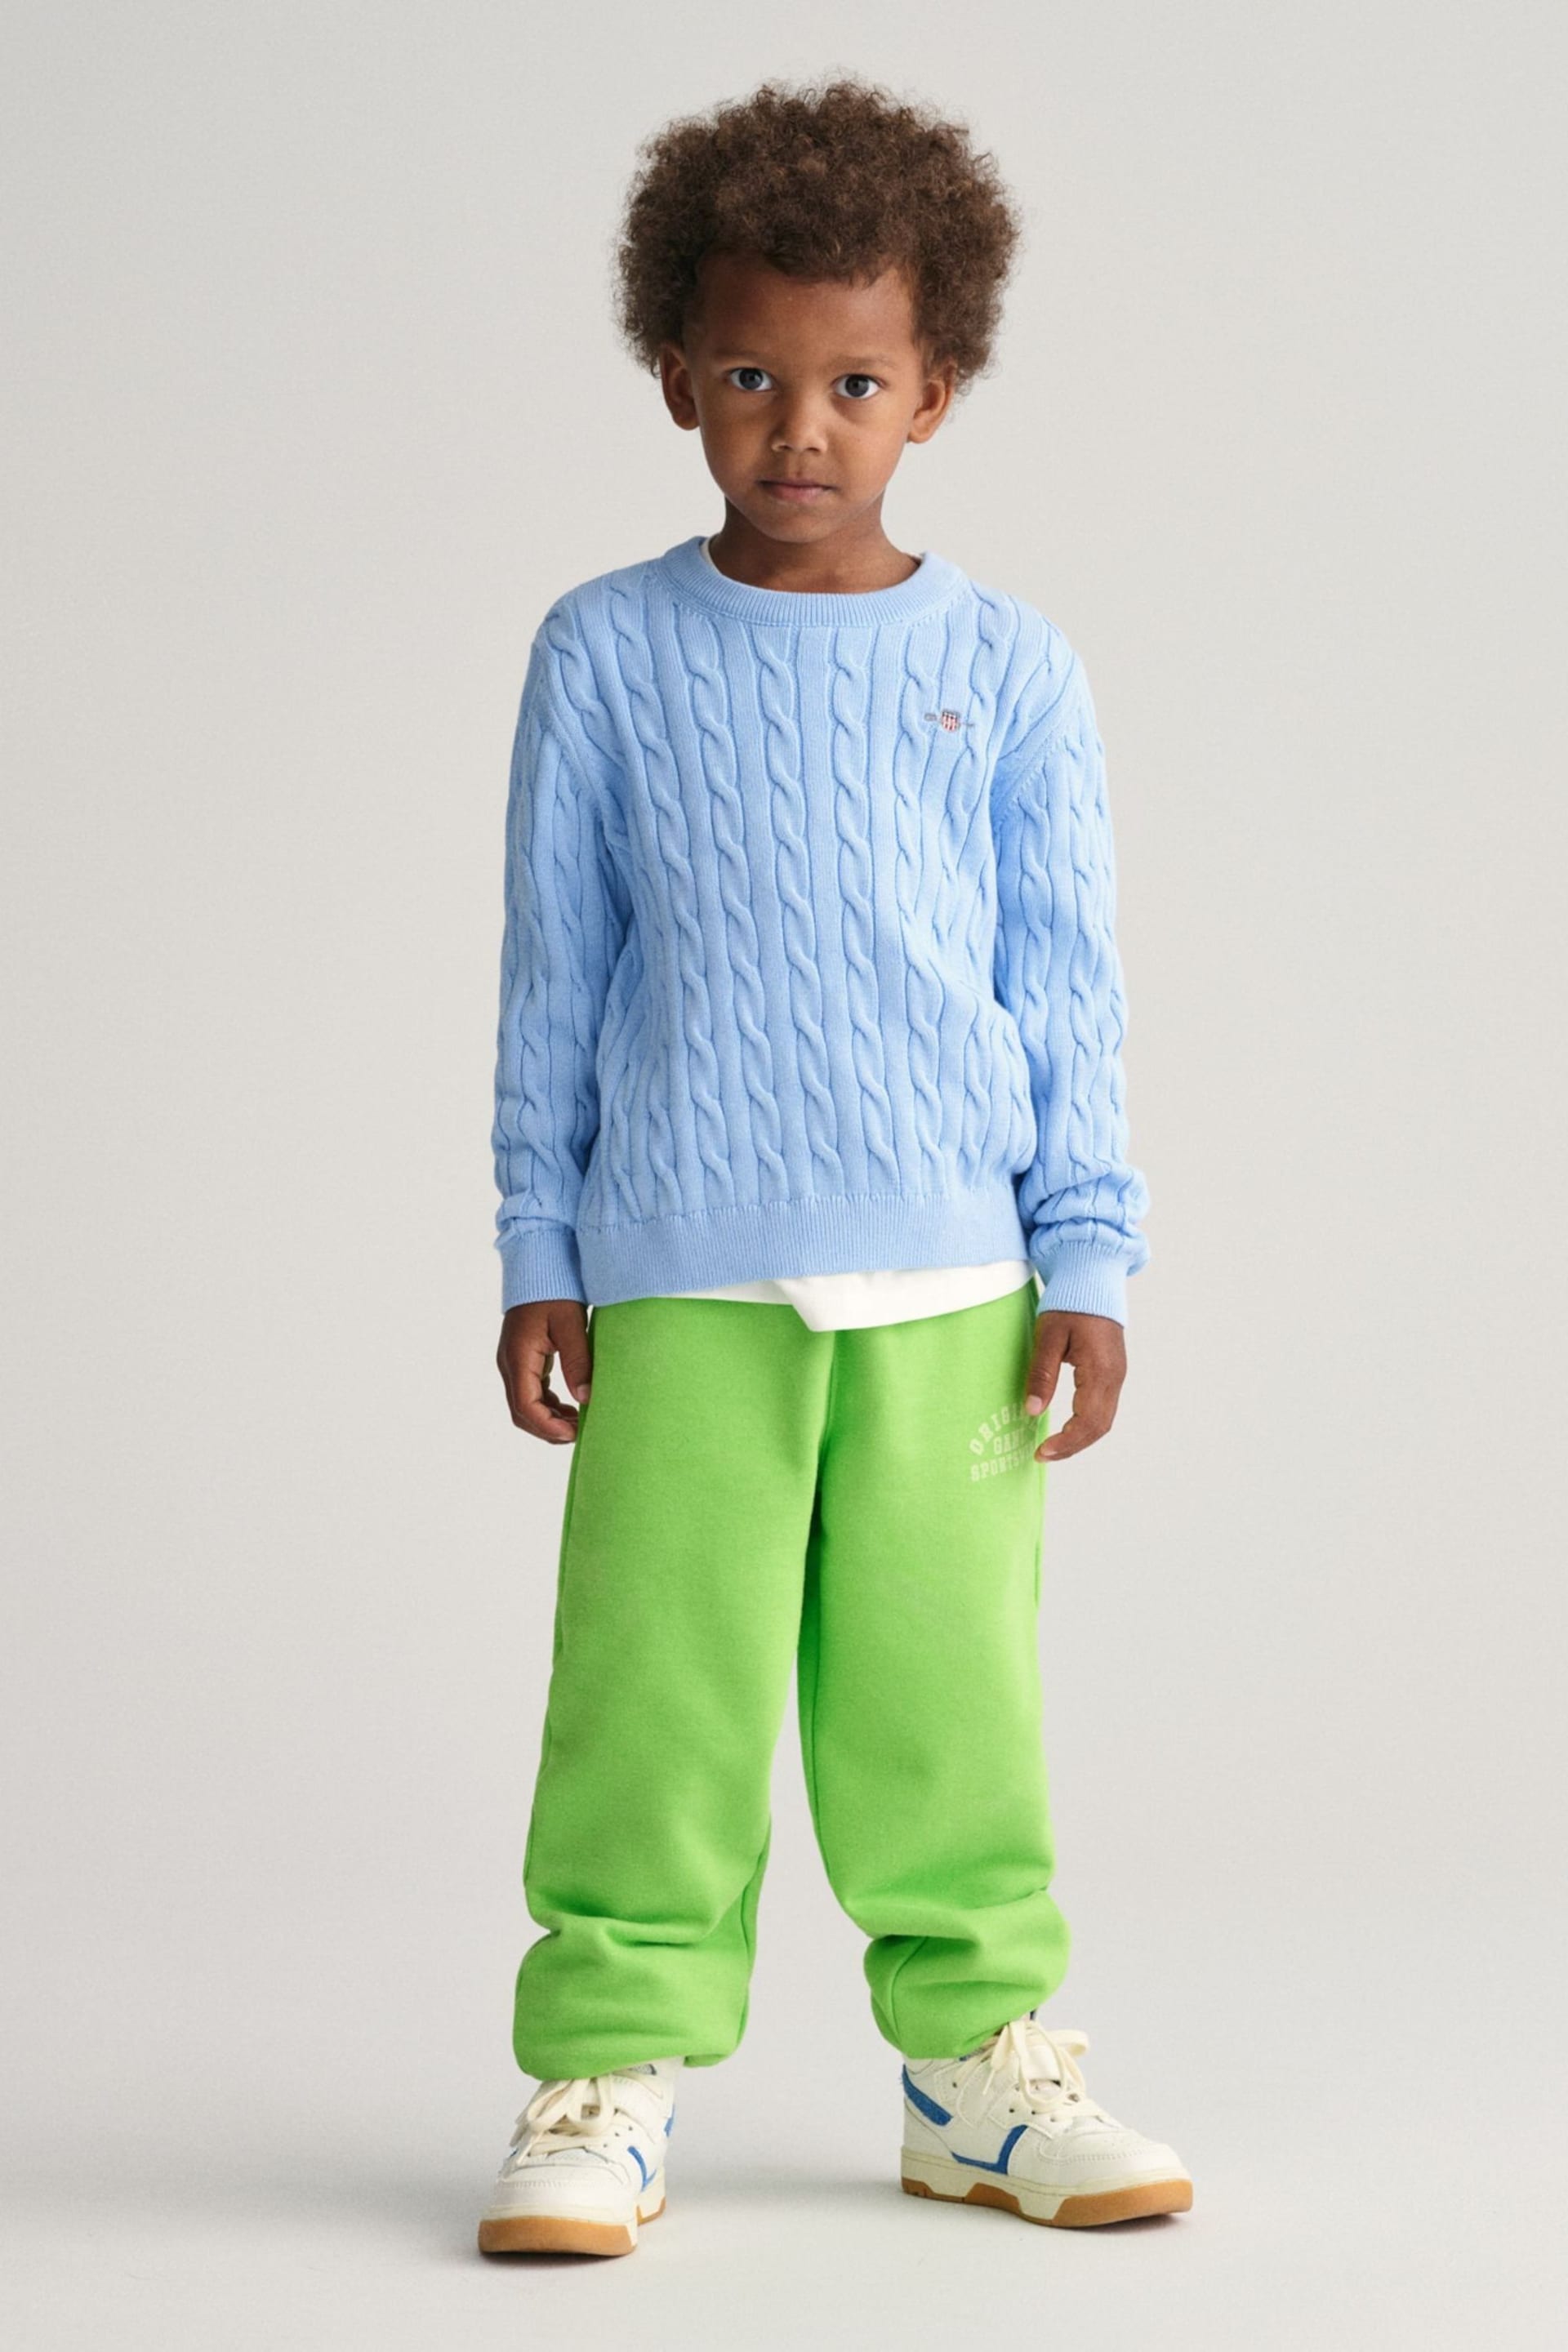 GANT Kids Shield Cotton Cable Knit Crew Neck Sweater - Image 3 of 6